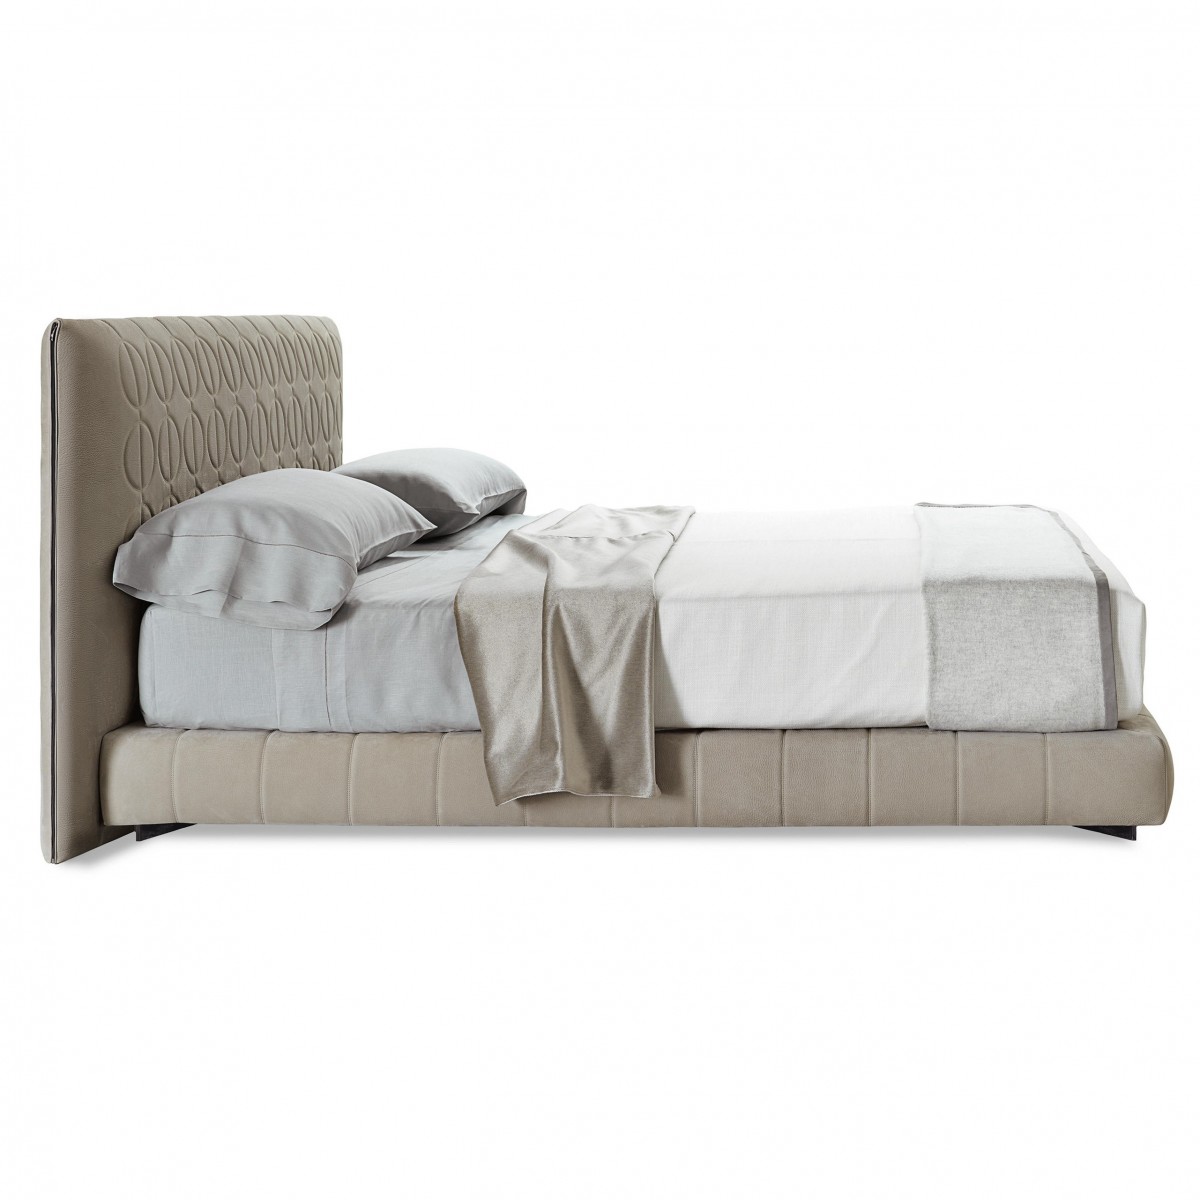 Curtis One-Piece Sommier Bed